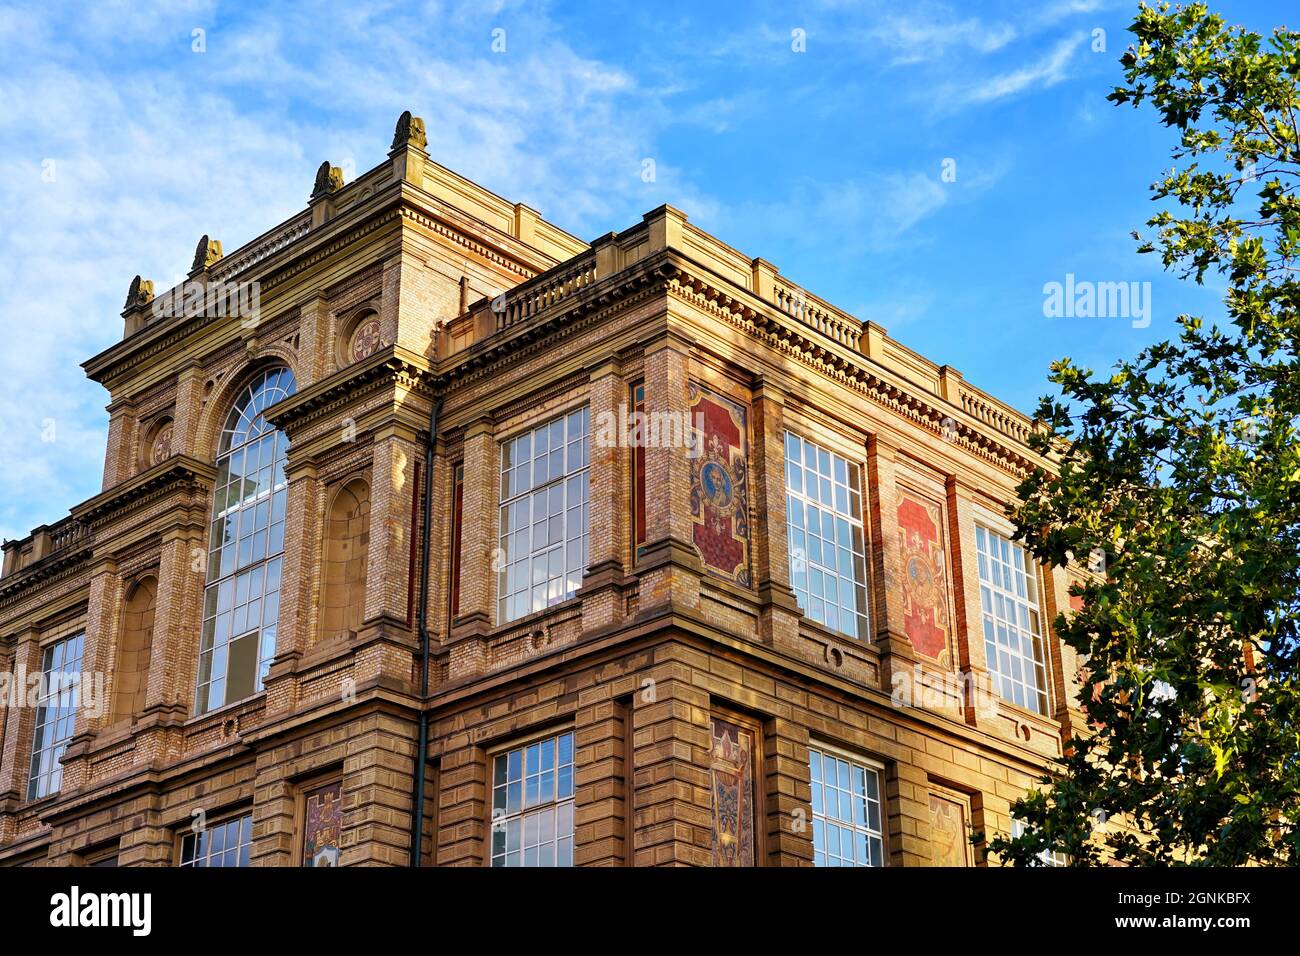 The building of the Academy of Art in Düsseldorf, Germany, built from 1875 to 1879. Stock Photo